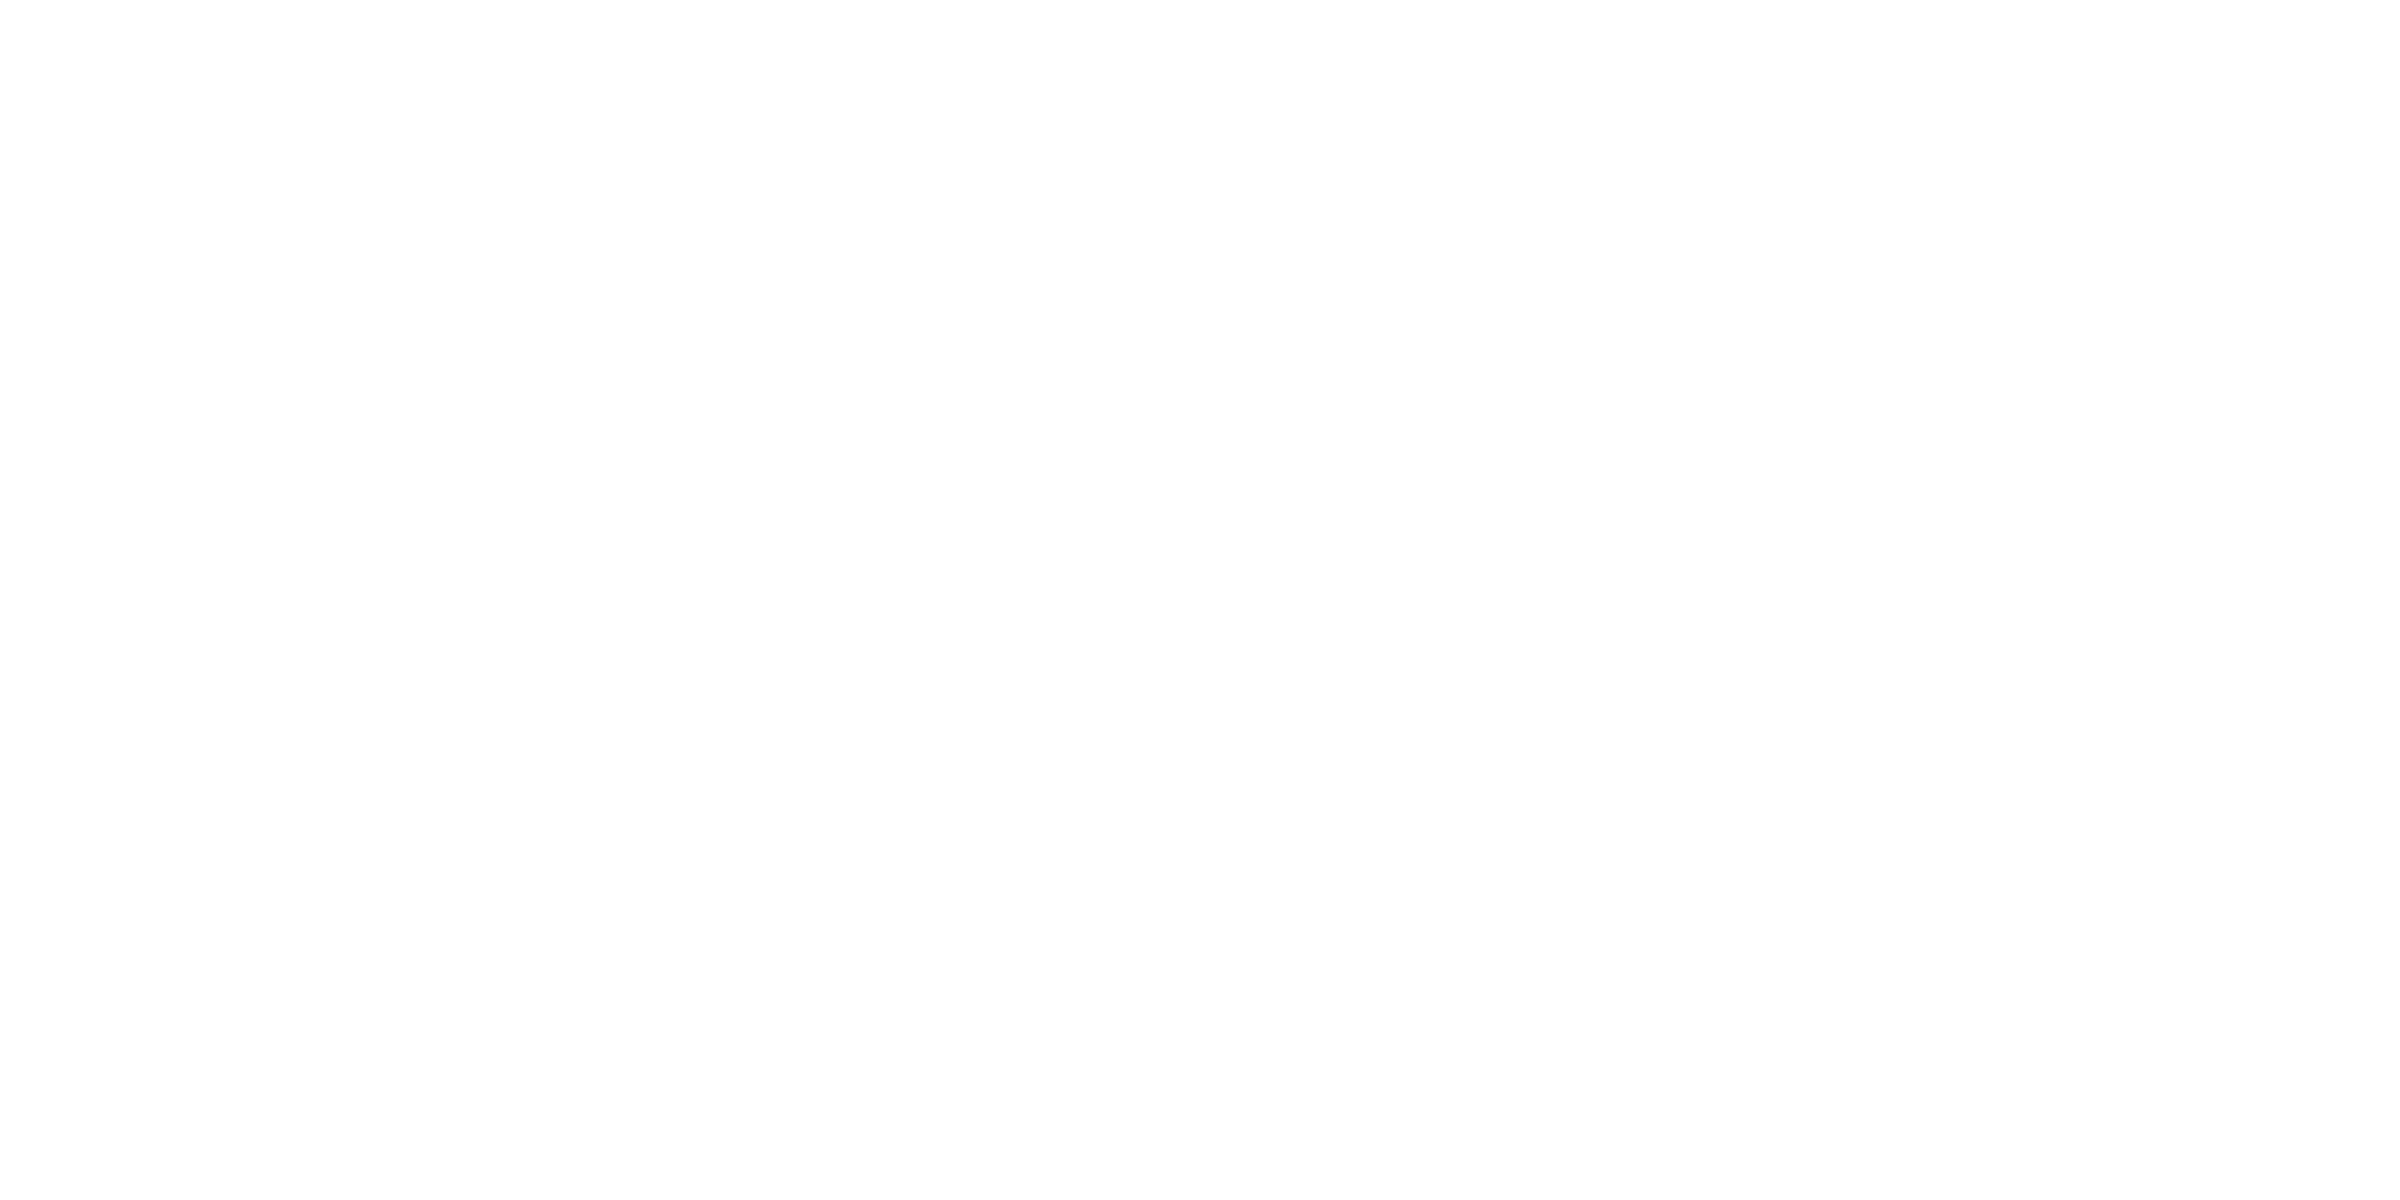 pff20_officialselection_white.png